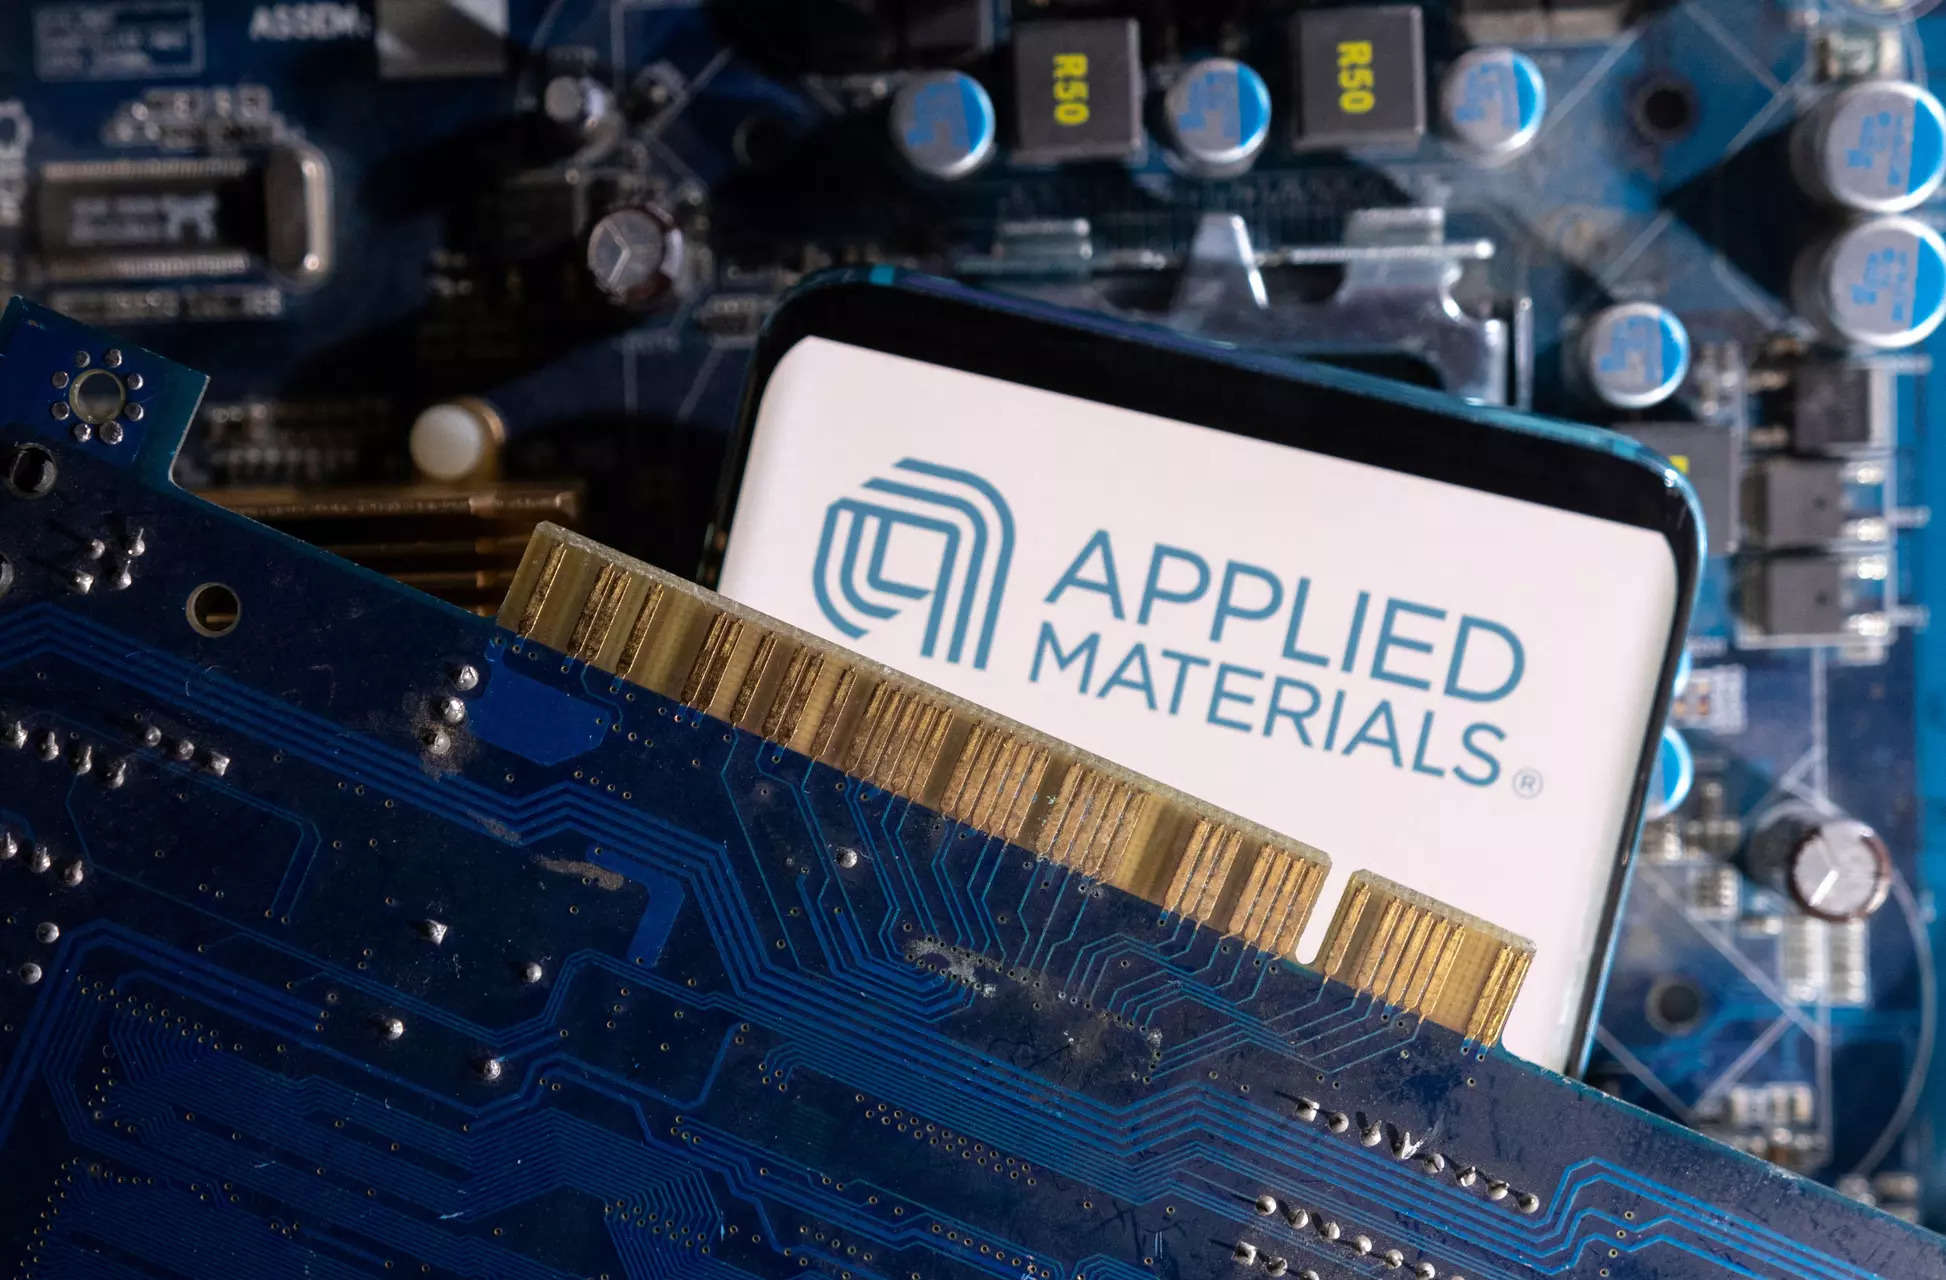 <p>End markets are mixed with weak industrial and auto markets, but strong image sensors, power chips, microcontrollers and other markets, Applied Materials Chief Financial Officer Brice Hill said on a post-earnings call.</p>